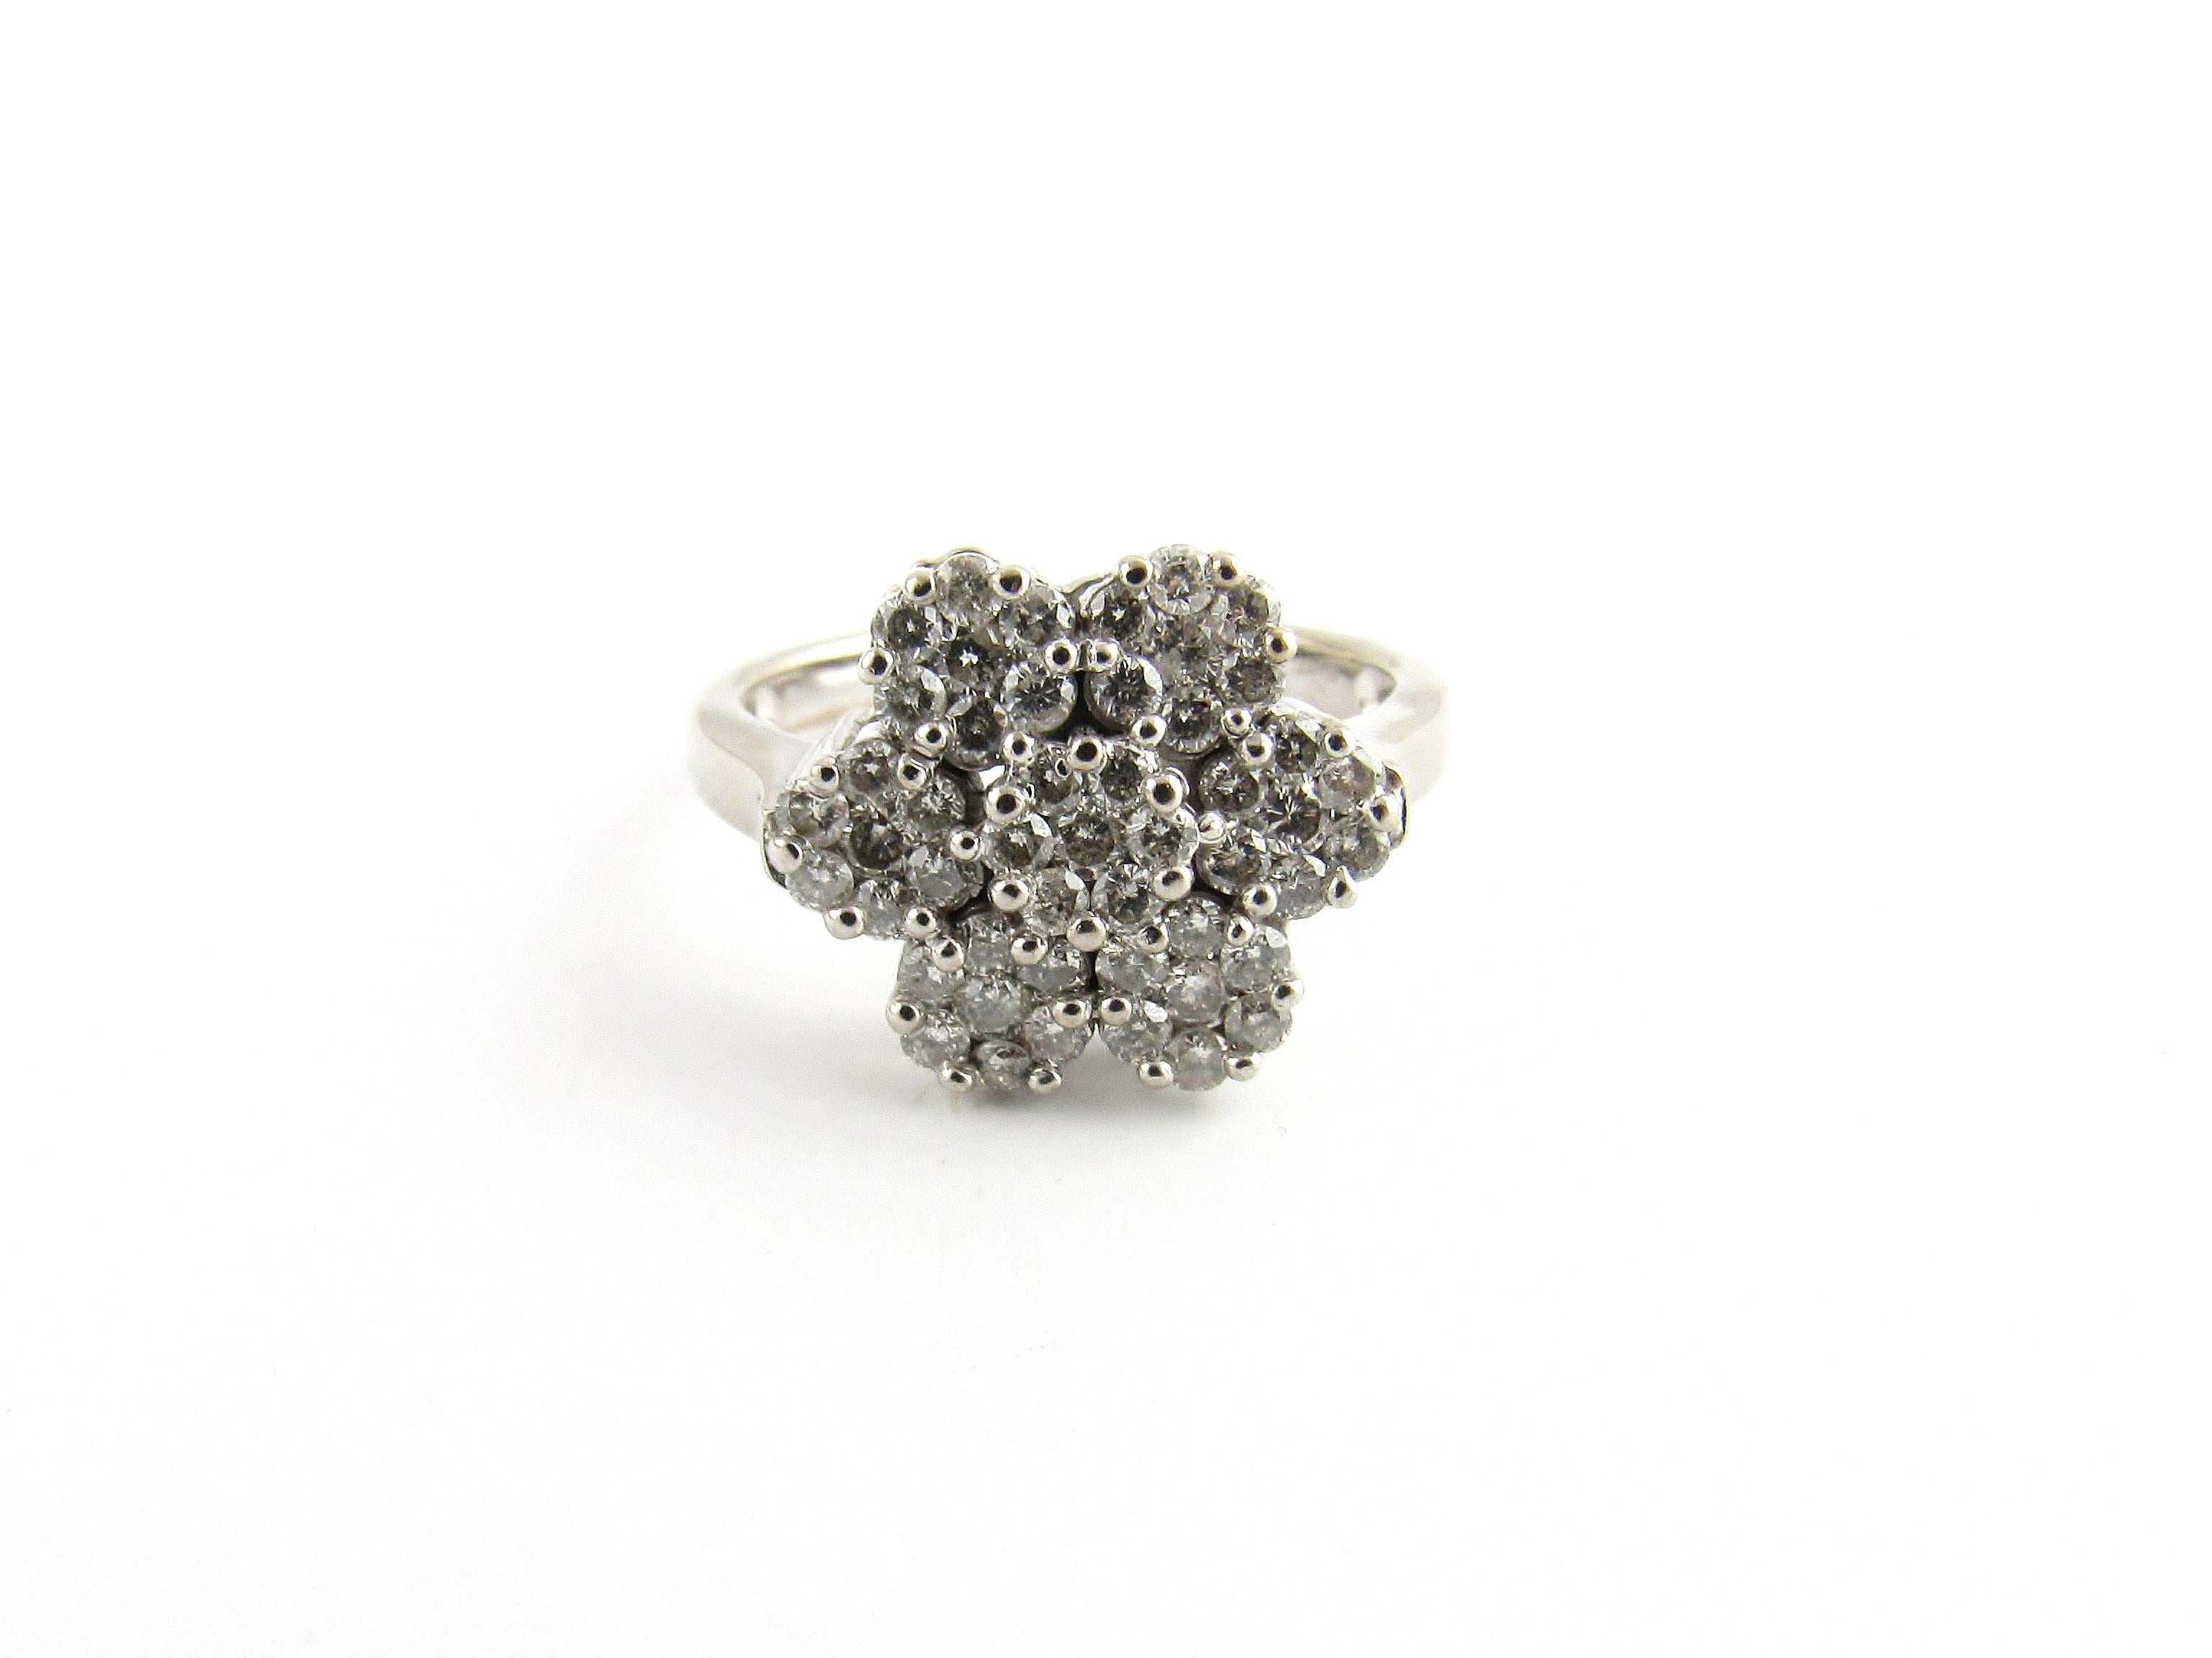 Vintage 14 Karat White Gold Diamond Flower Ring Size 7

This stunning ring features 49 round brilliant cut diamonds set in an exquisite floral design. Top of ring measures 15 mm. Shank measures 2.5 mm.

Approximate total diamond weight: 1